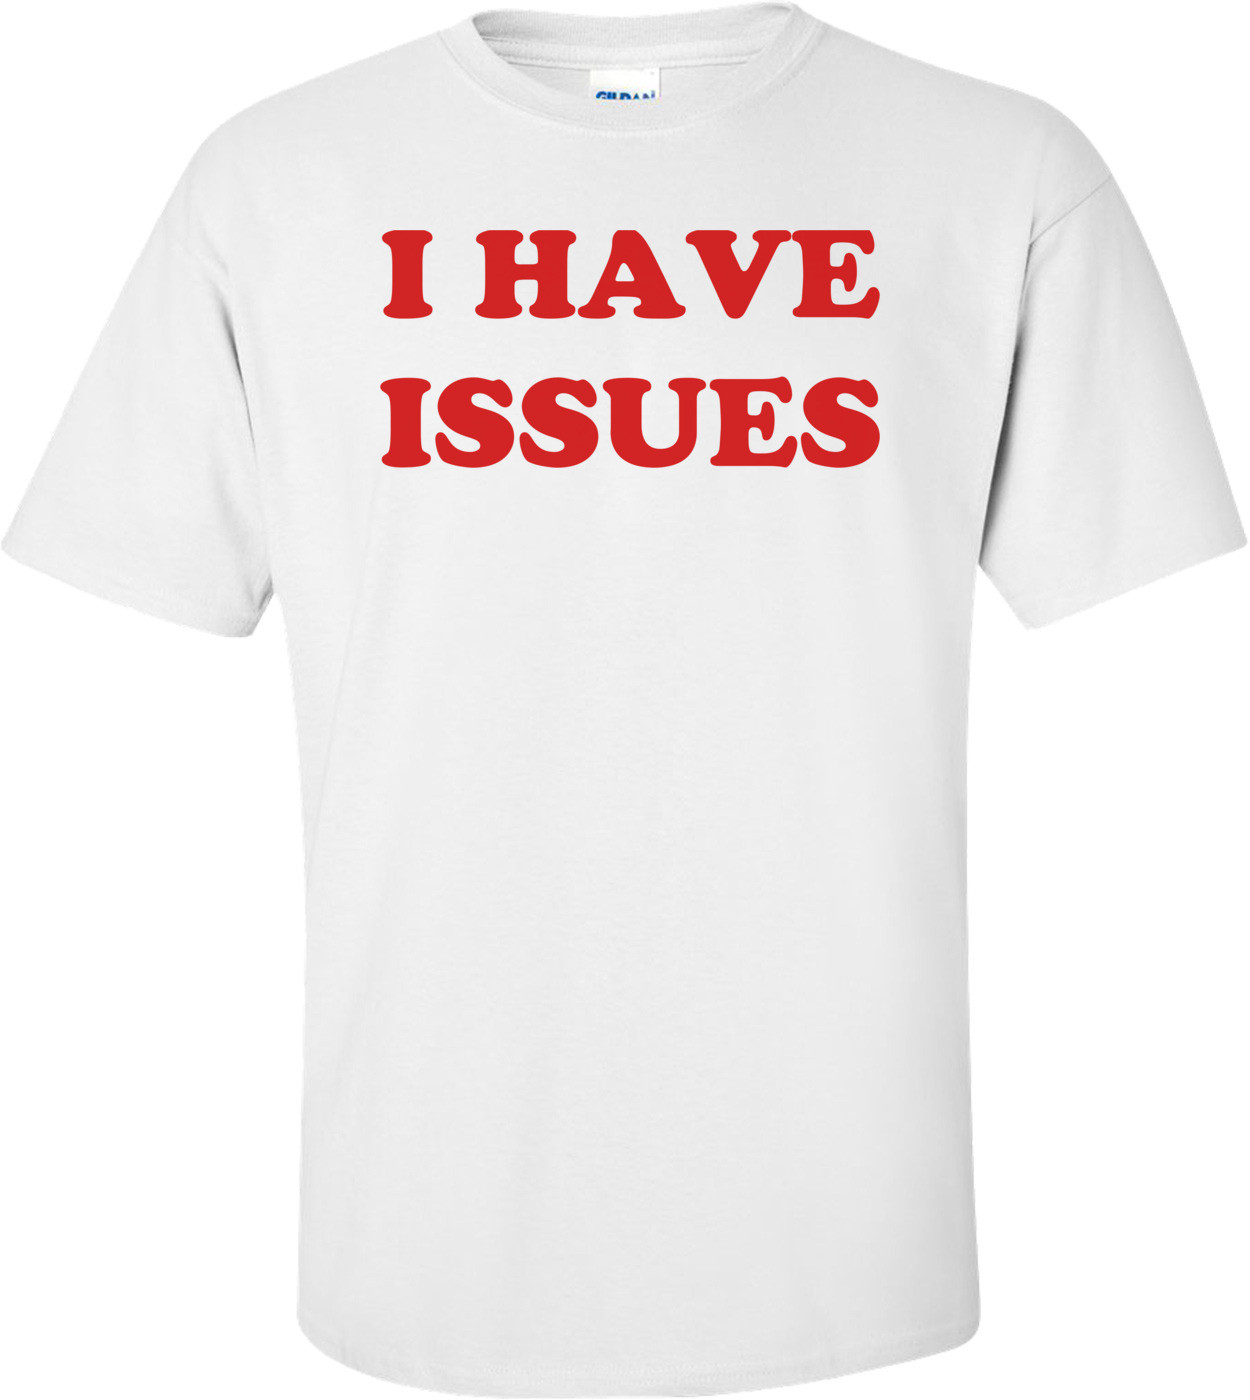 I HAVE ISSUES Shirt